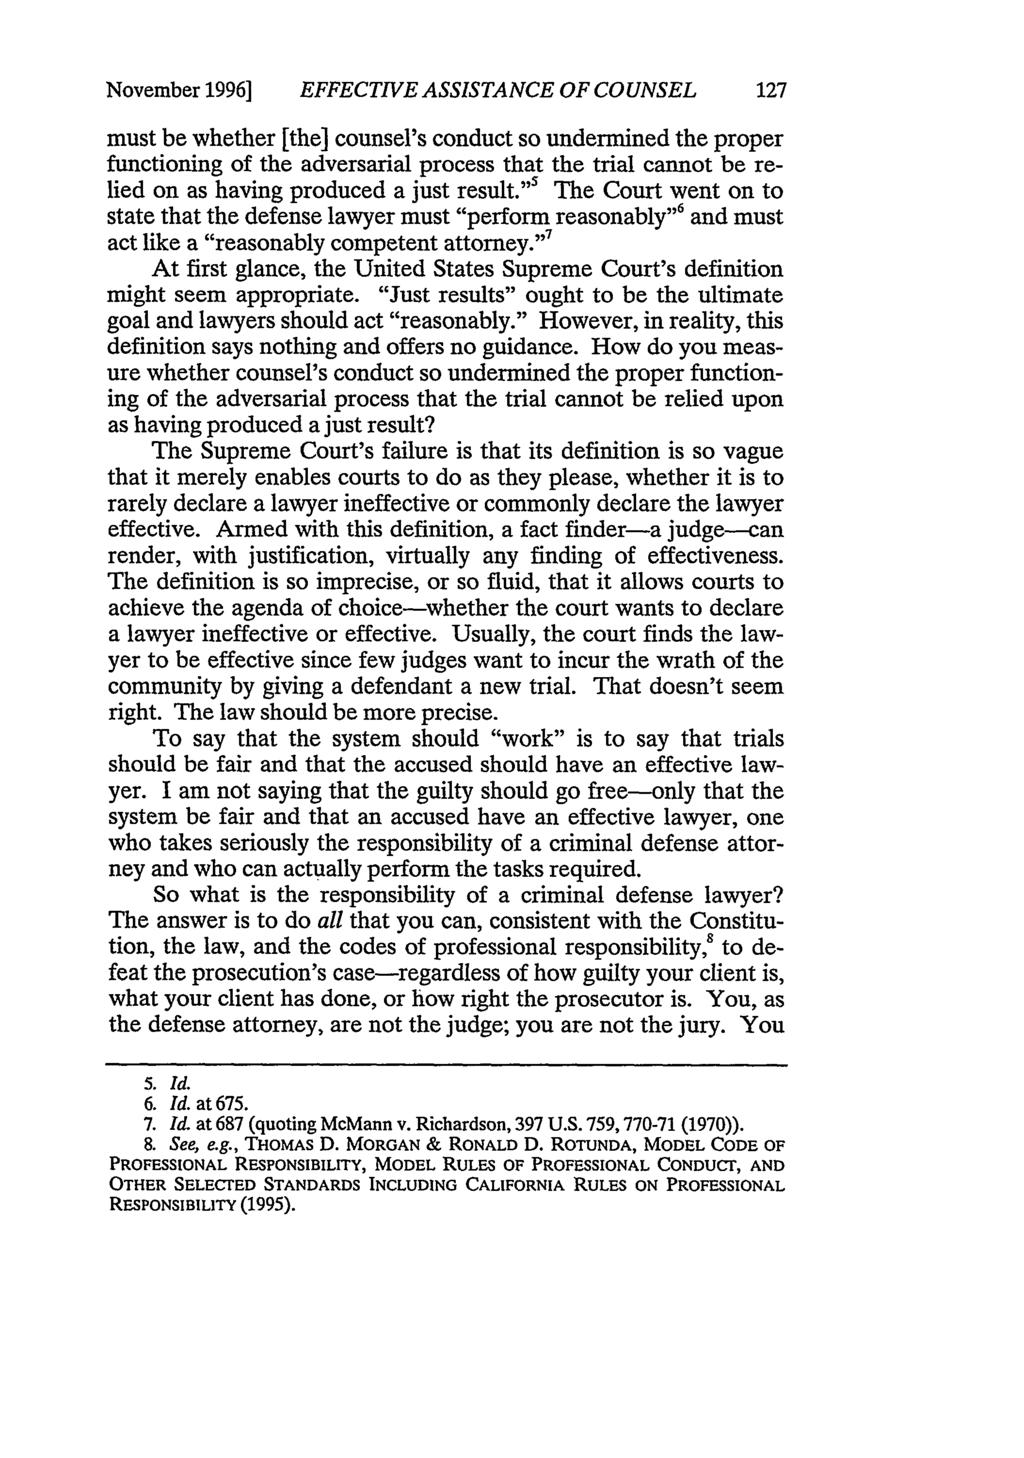 November 1996] EFFECTIVE ASSISTANCE OF COUNSEL must be whether [the] counsel's conduct so undermined the proper functioning of the adversarial process that the trial cannot be relied on as having